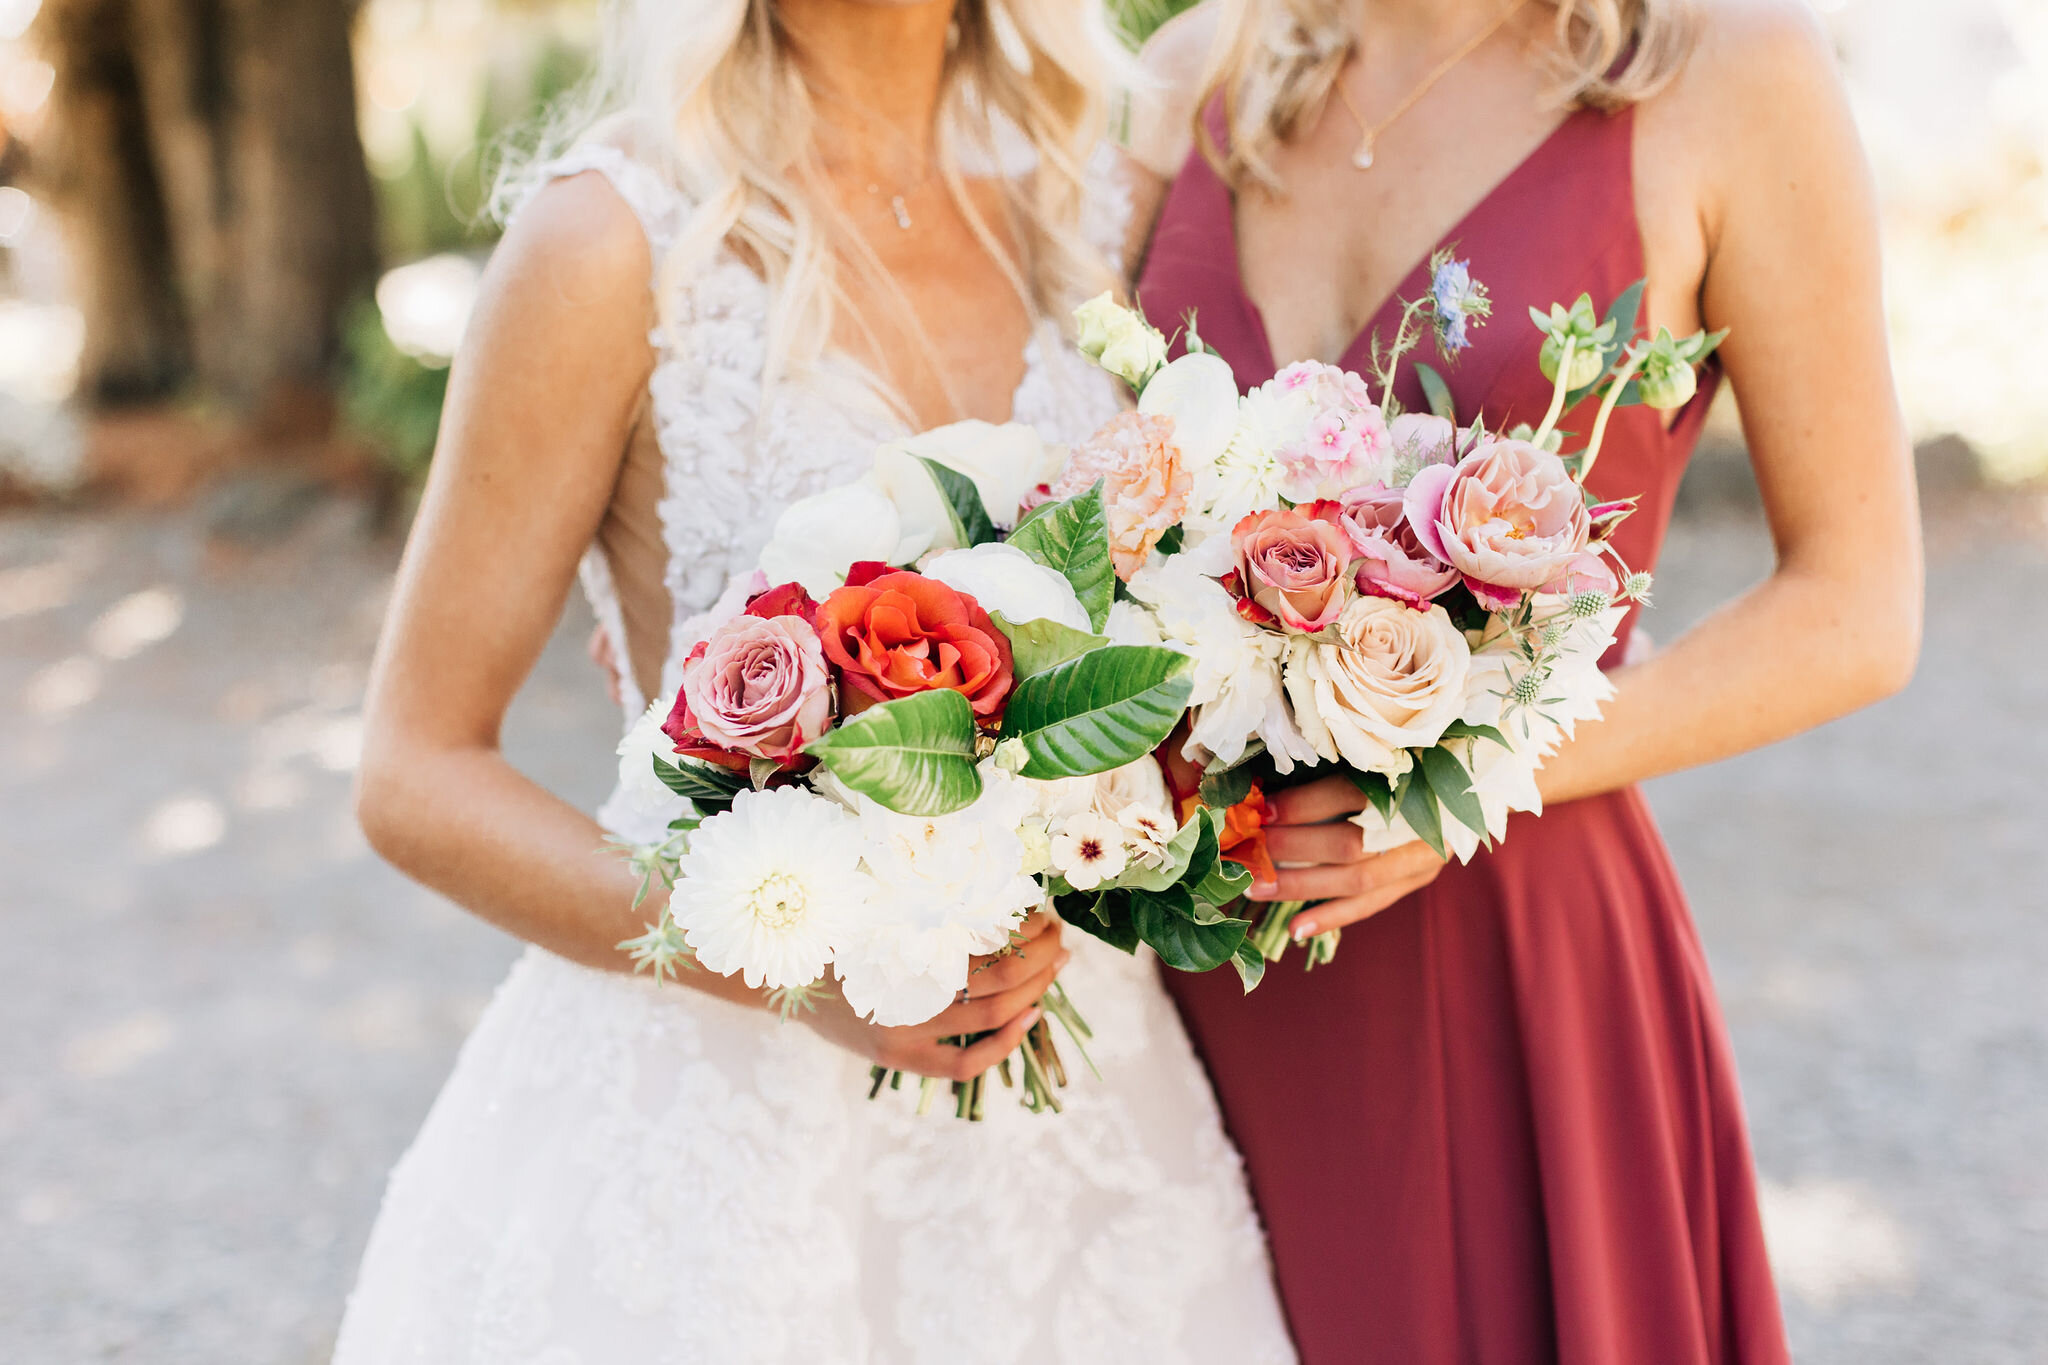 pink-and-red-bouquet-wedding-florist-oak-and-fig-floral-seattle-florist